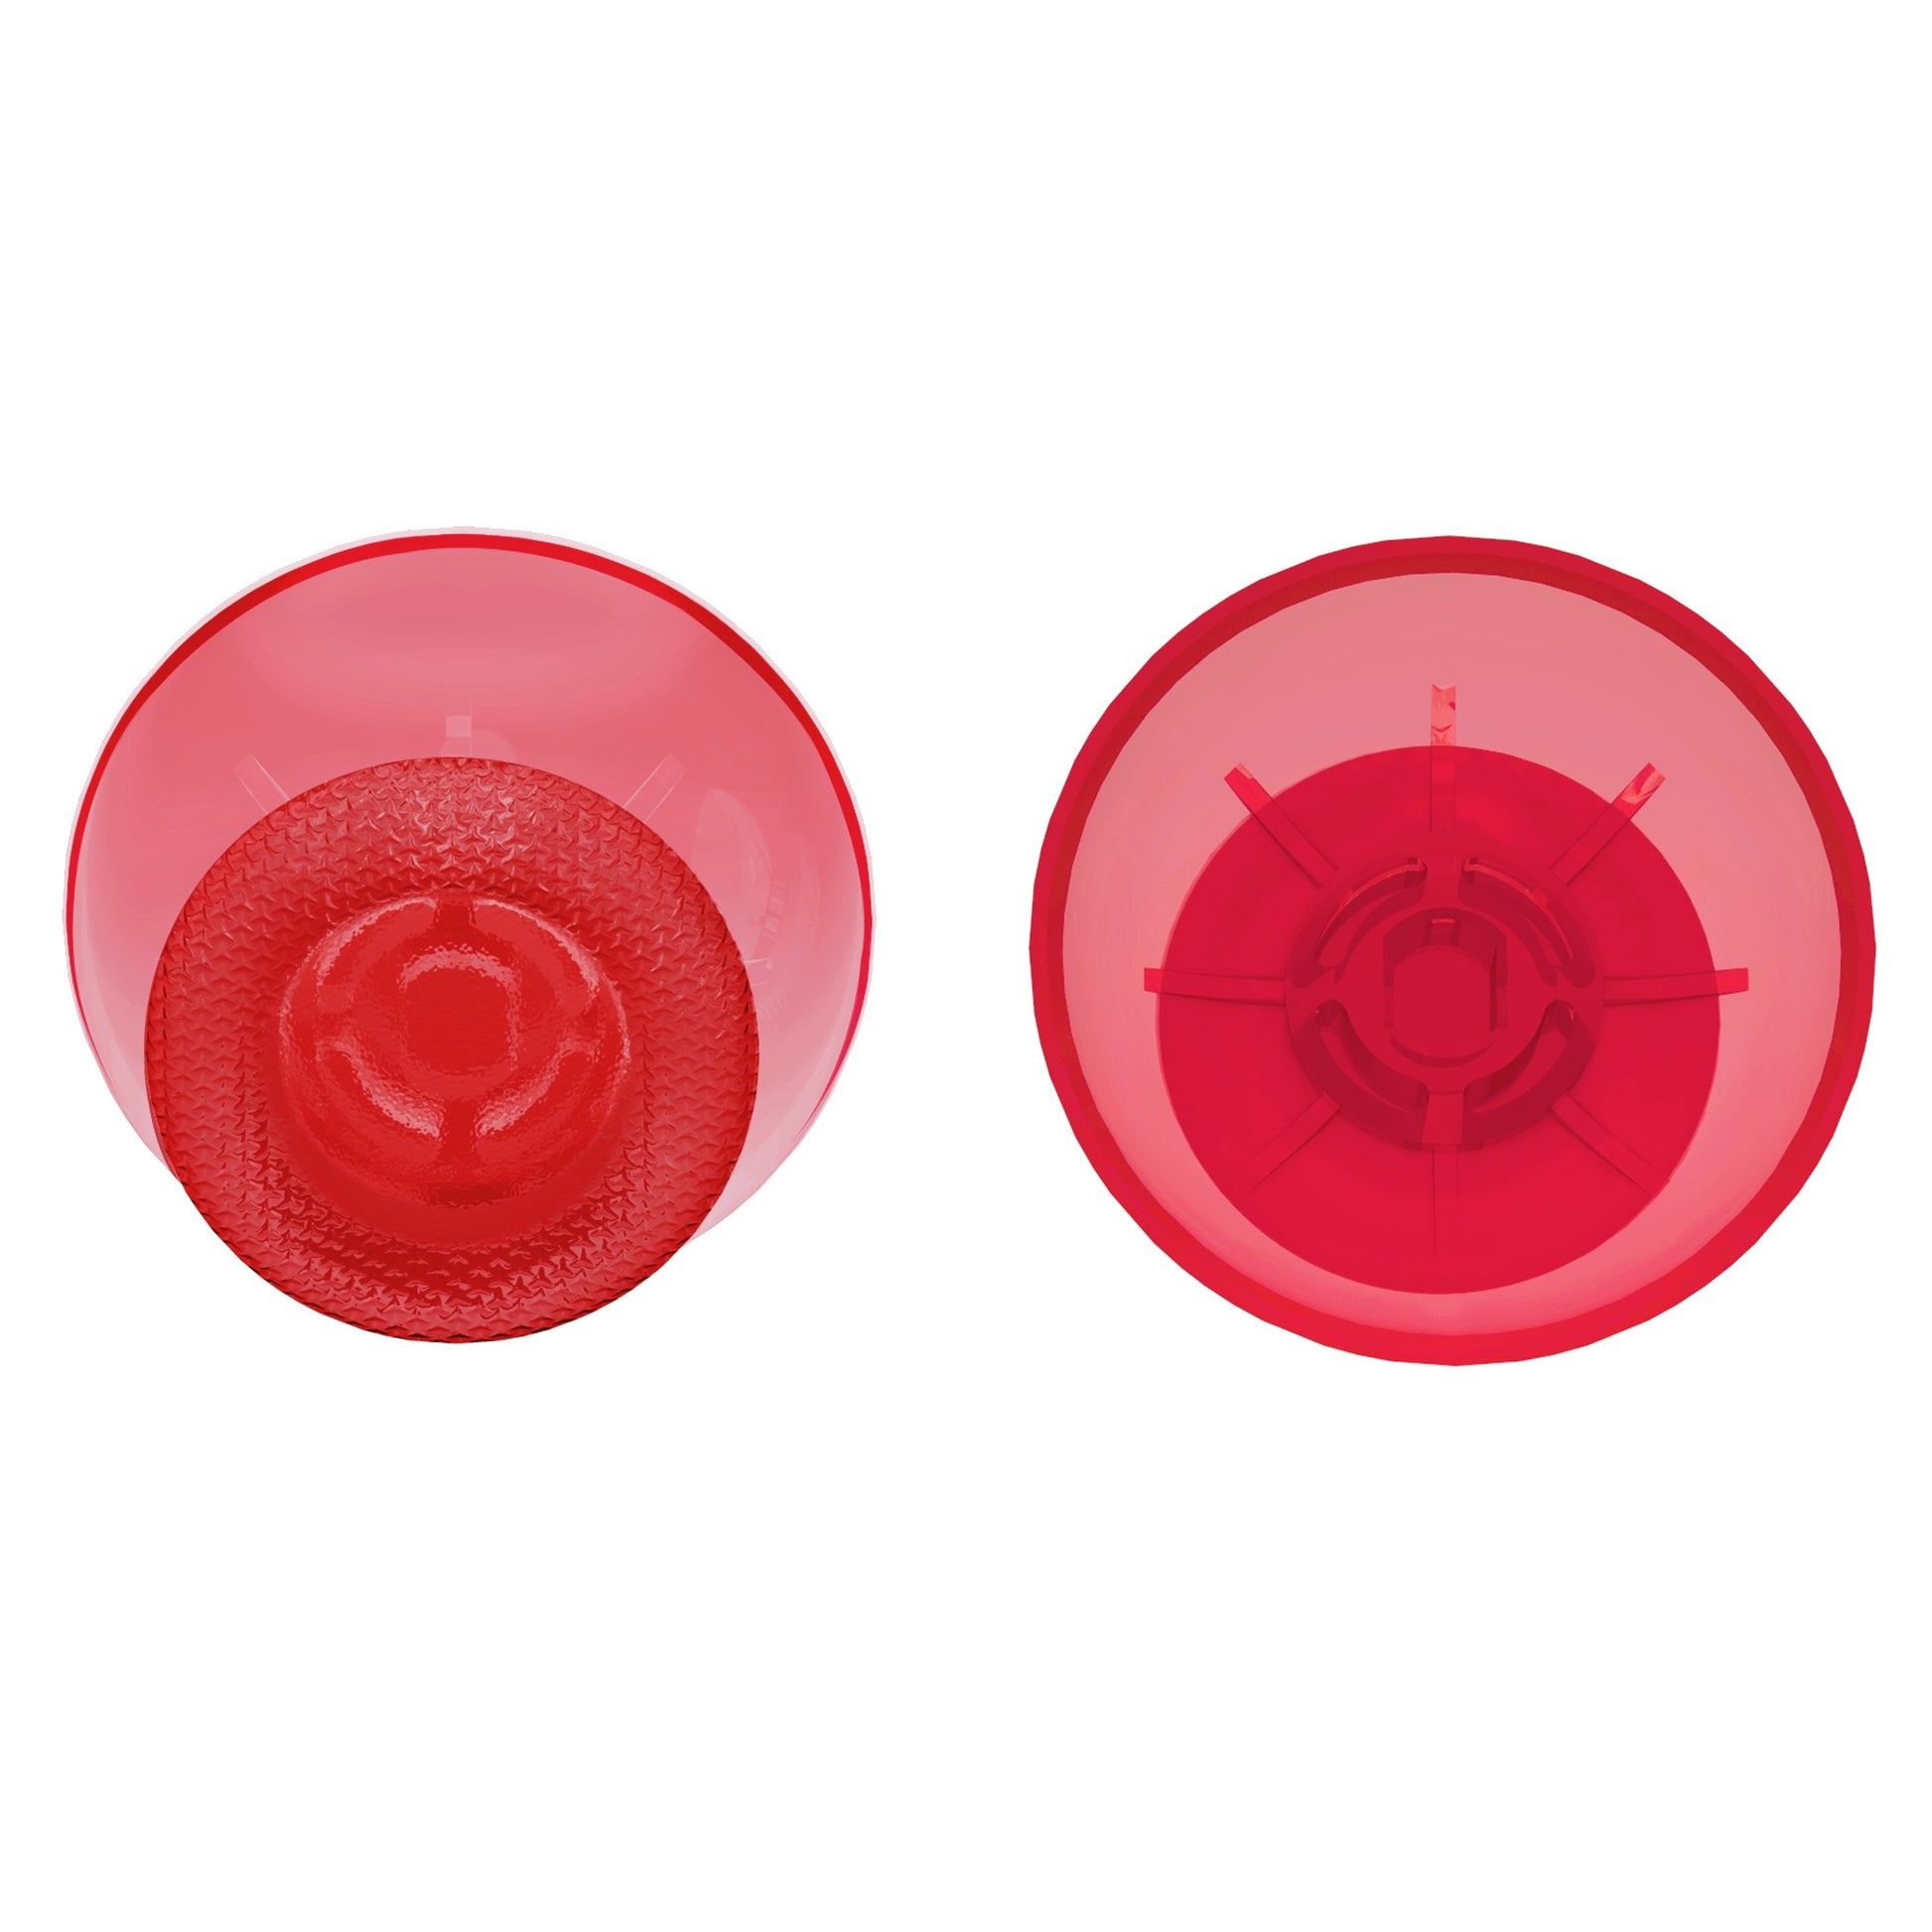 eXtremeRate Retail Clear Red Replacement Thumbsticks for ps5 Controller, Custom Analog Stick Joystick Compatible with ps5, for ps4 All Model Controller - JPF622